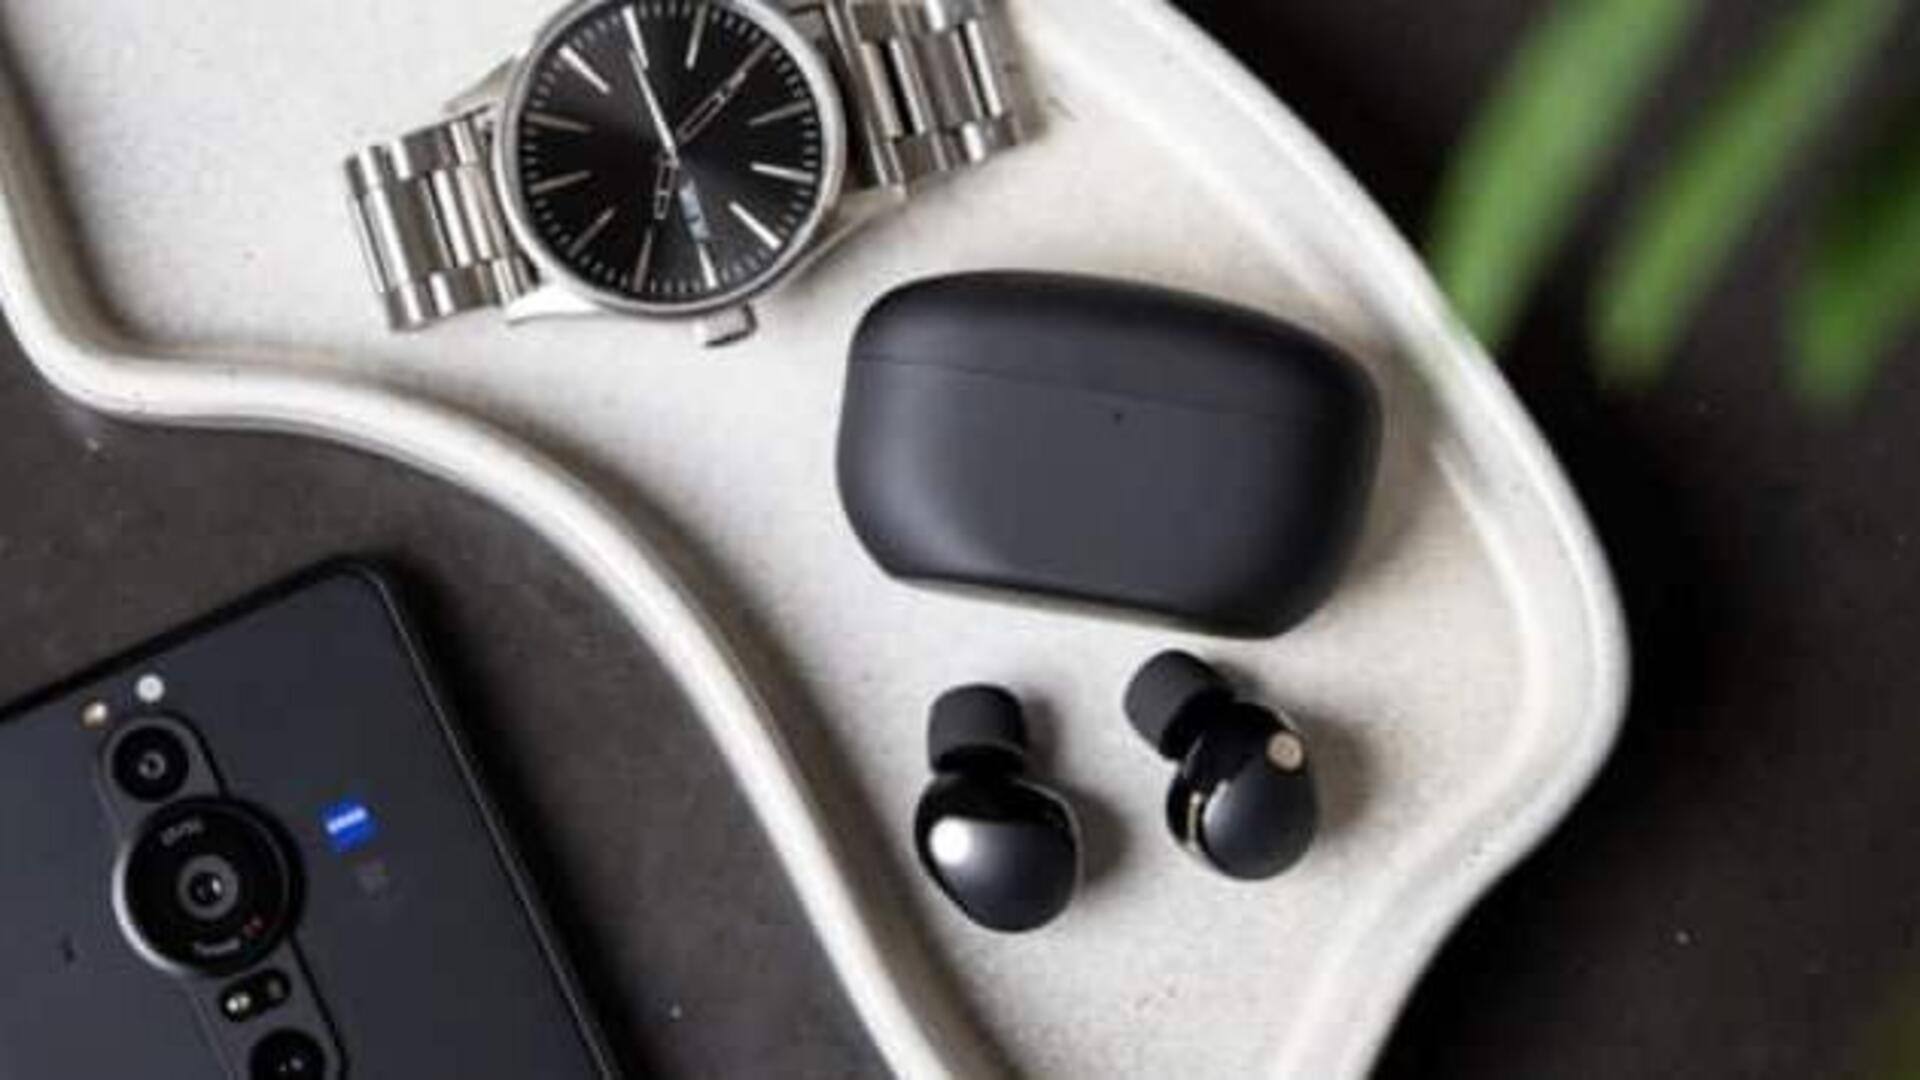 Sony's most advanced earbuds launched at Rs. 25,000